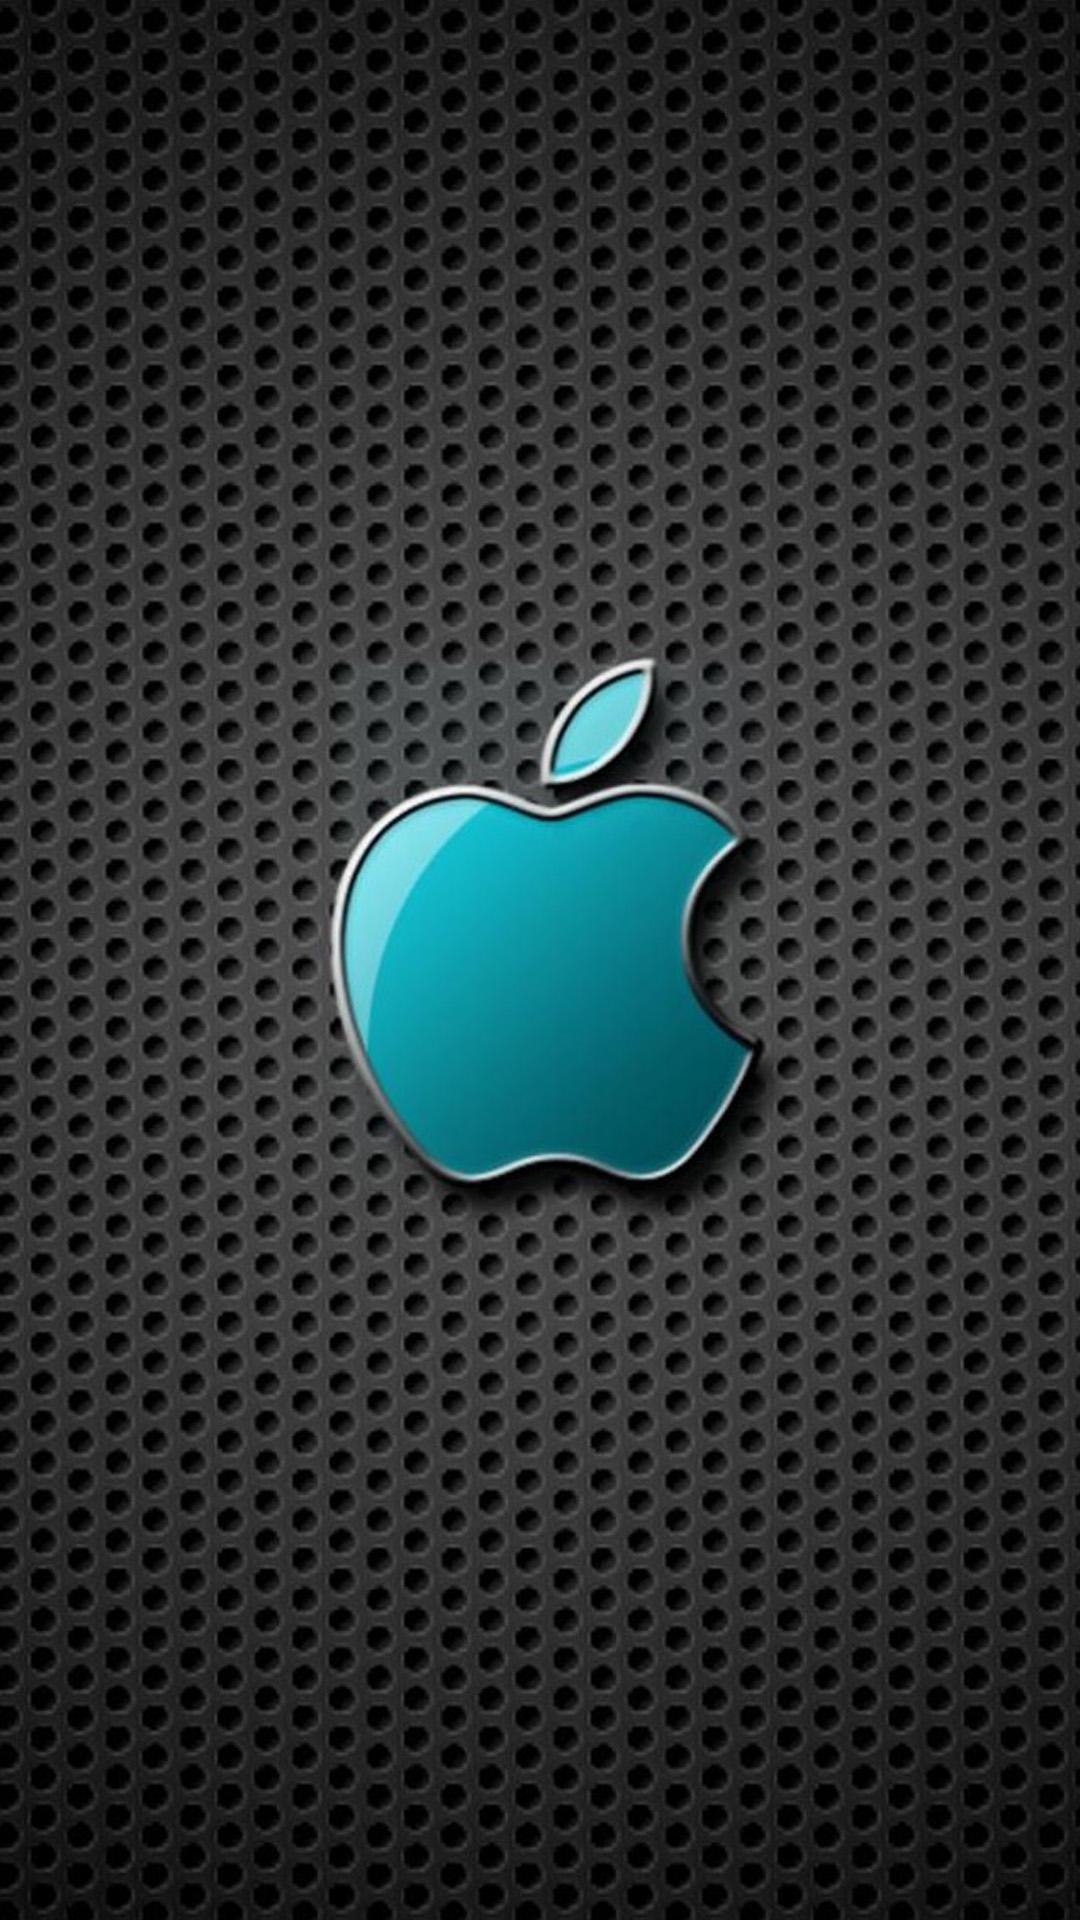 1080x1920 Apple iPhone Wallpapers - Wallpaper Cave